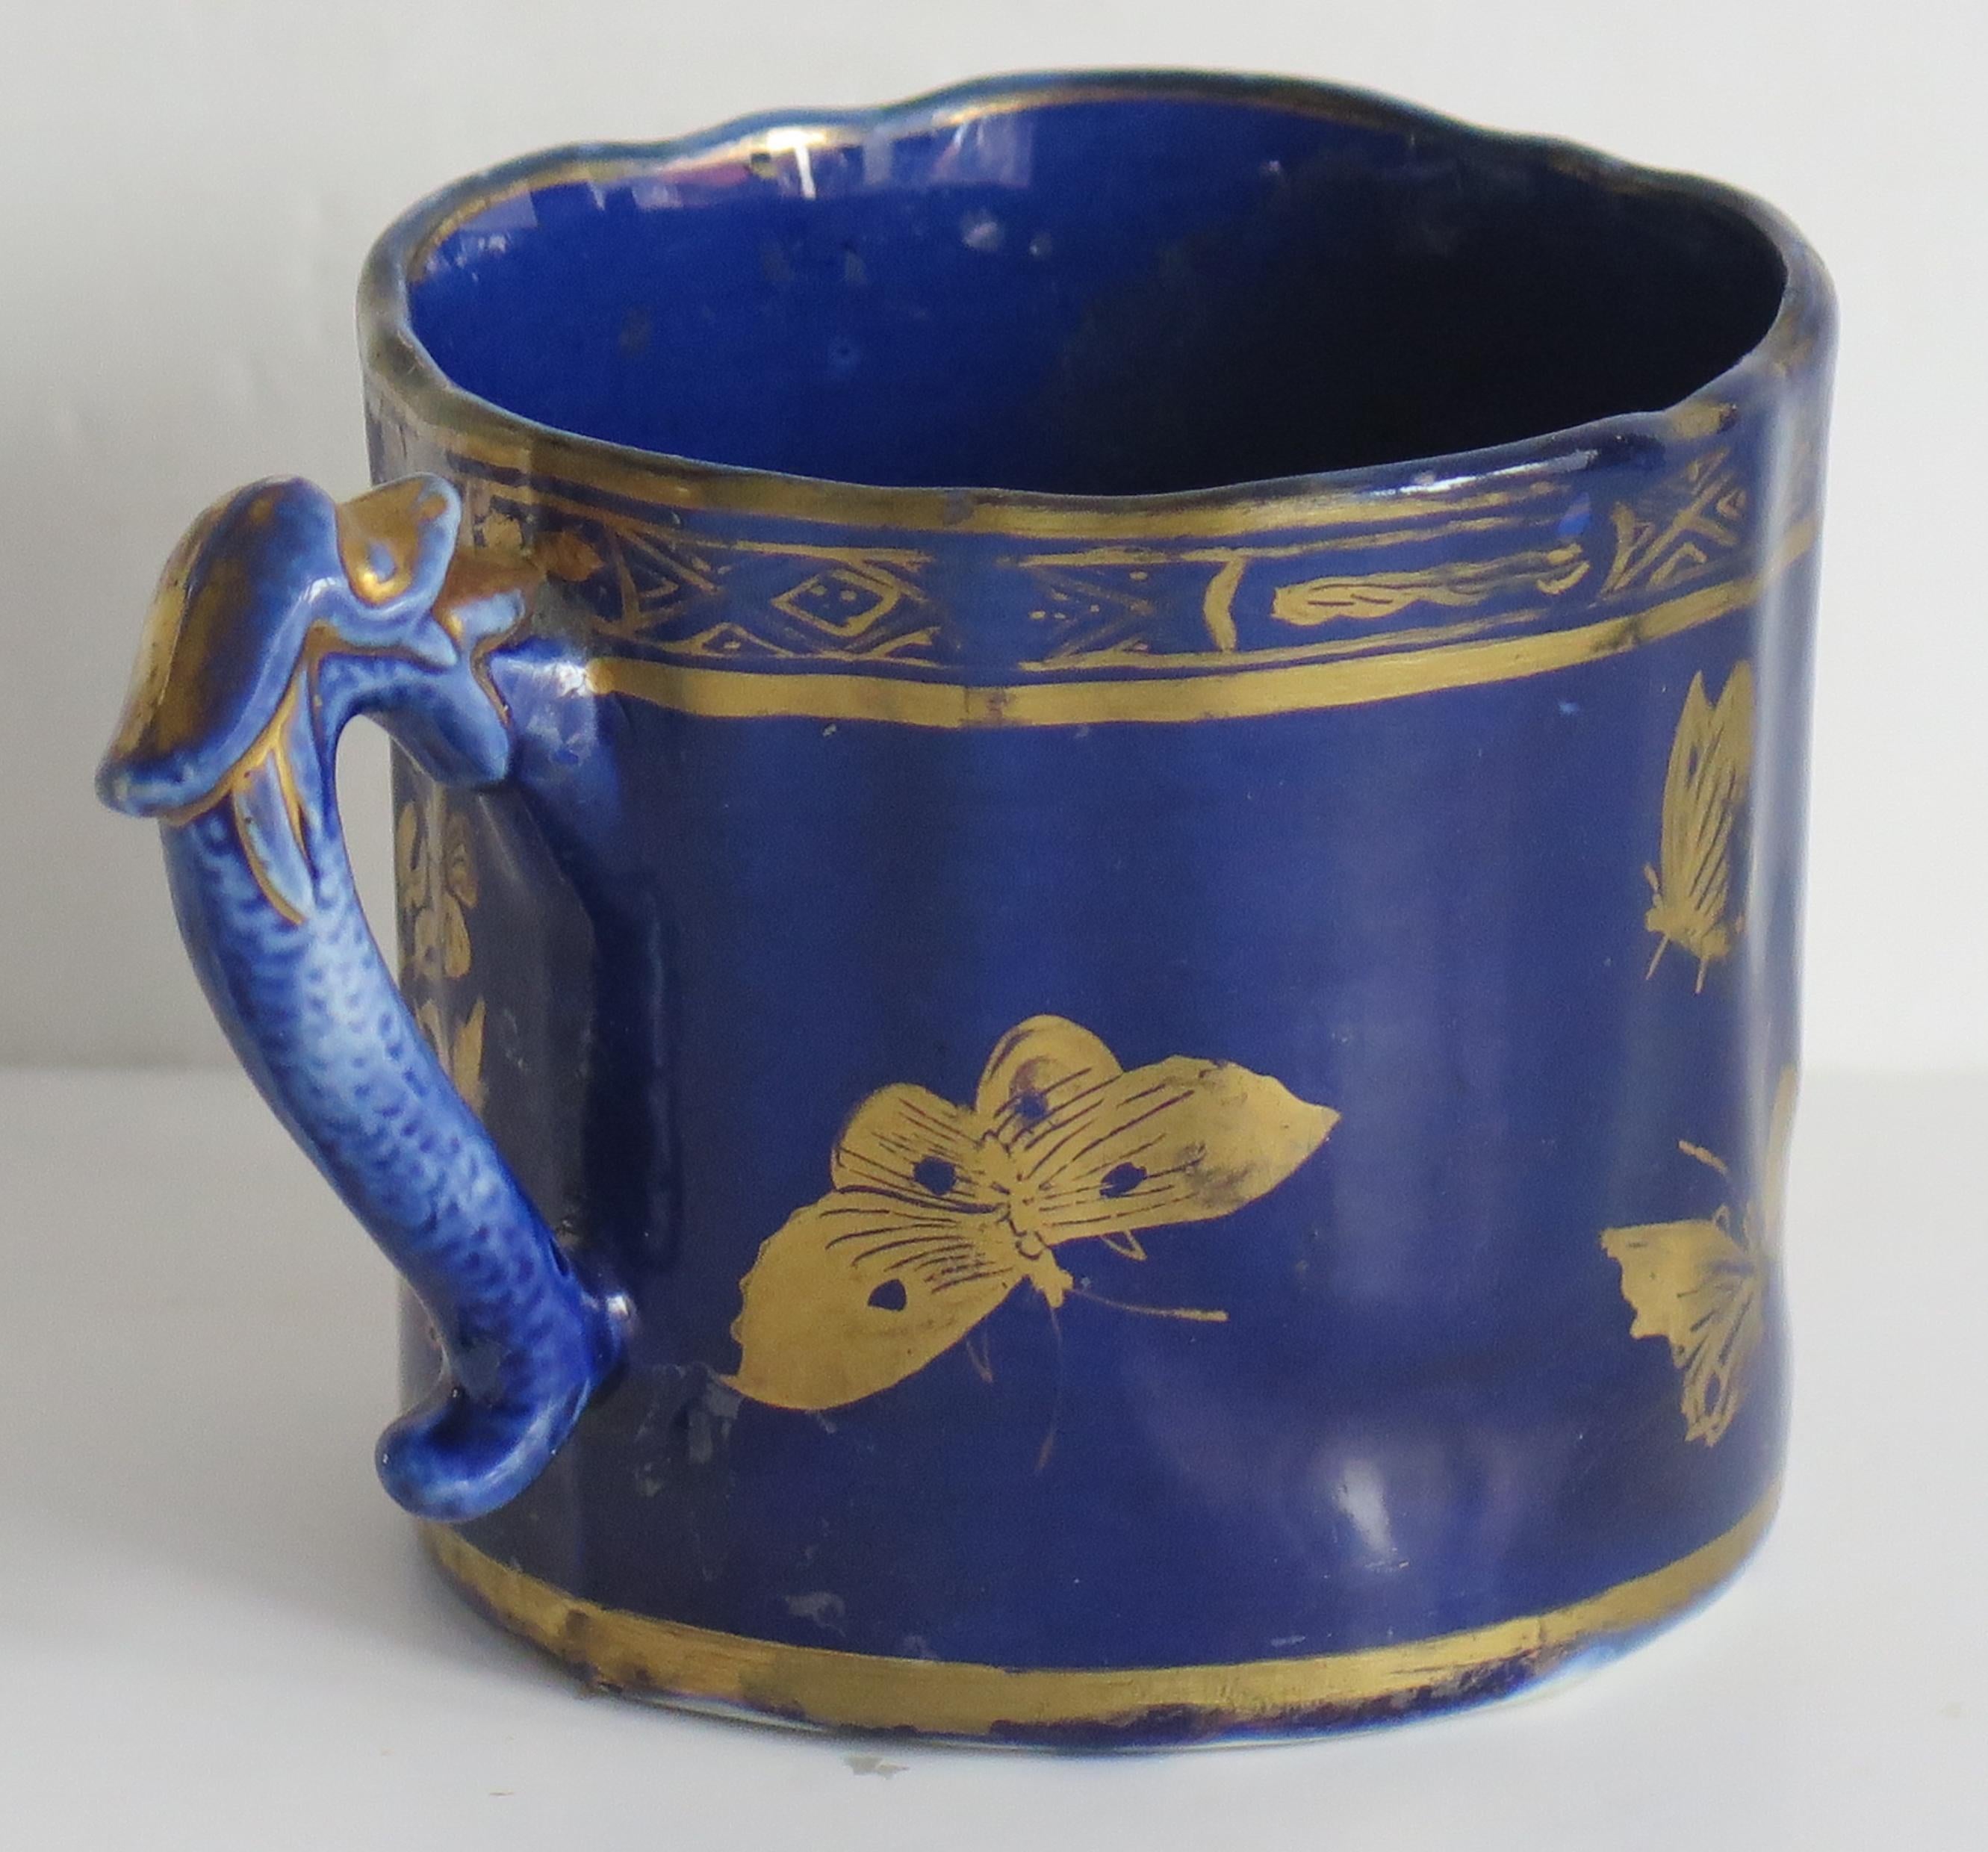 Hand-Painted Rare Early Mason's Ironstone Mug in Gold Posies & Butterflies pattern circa 1818